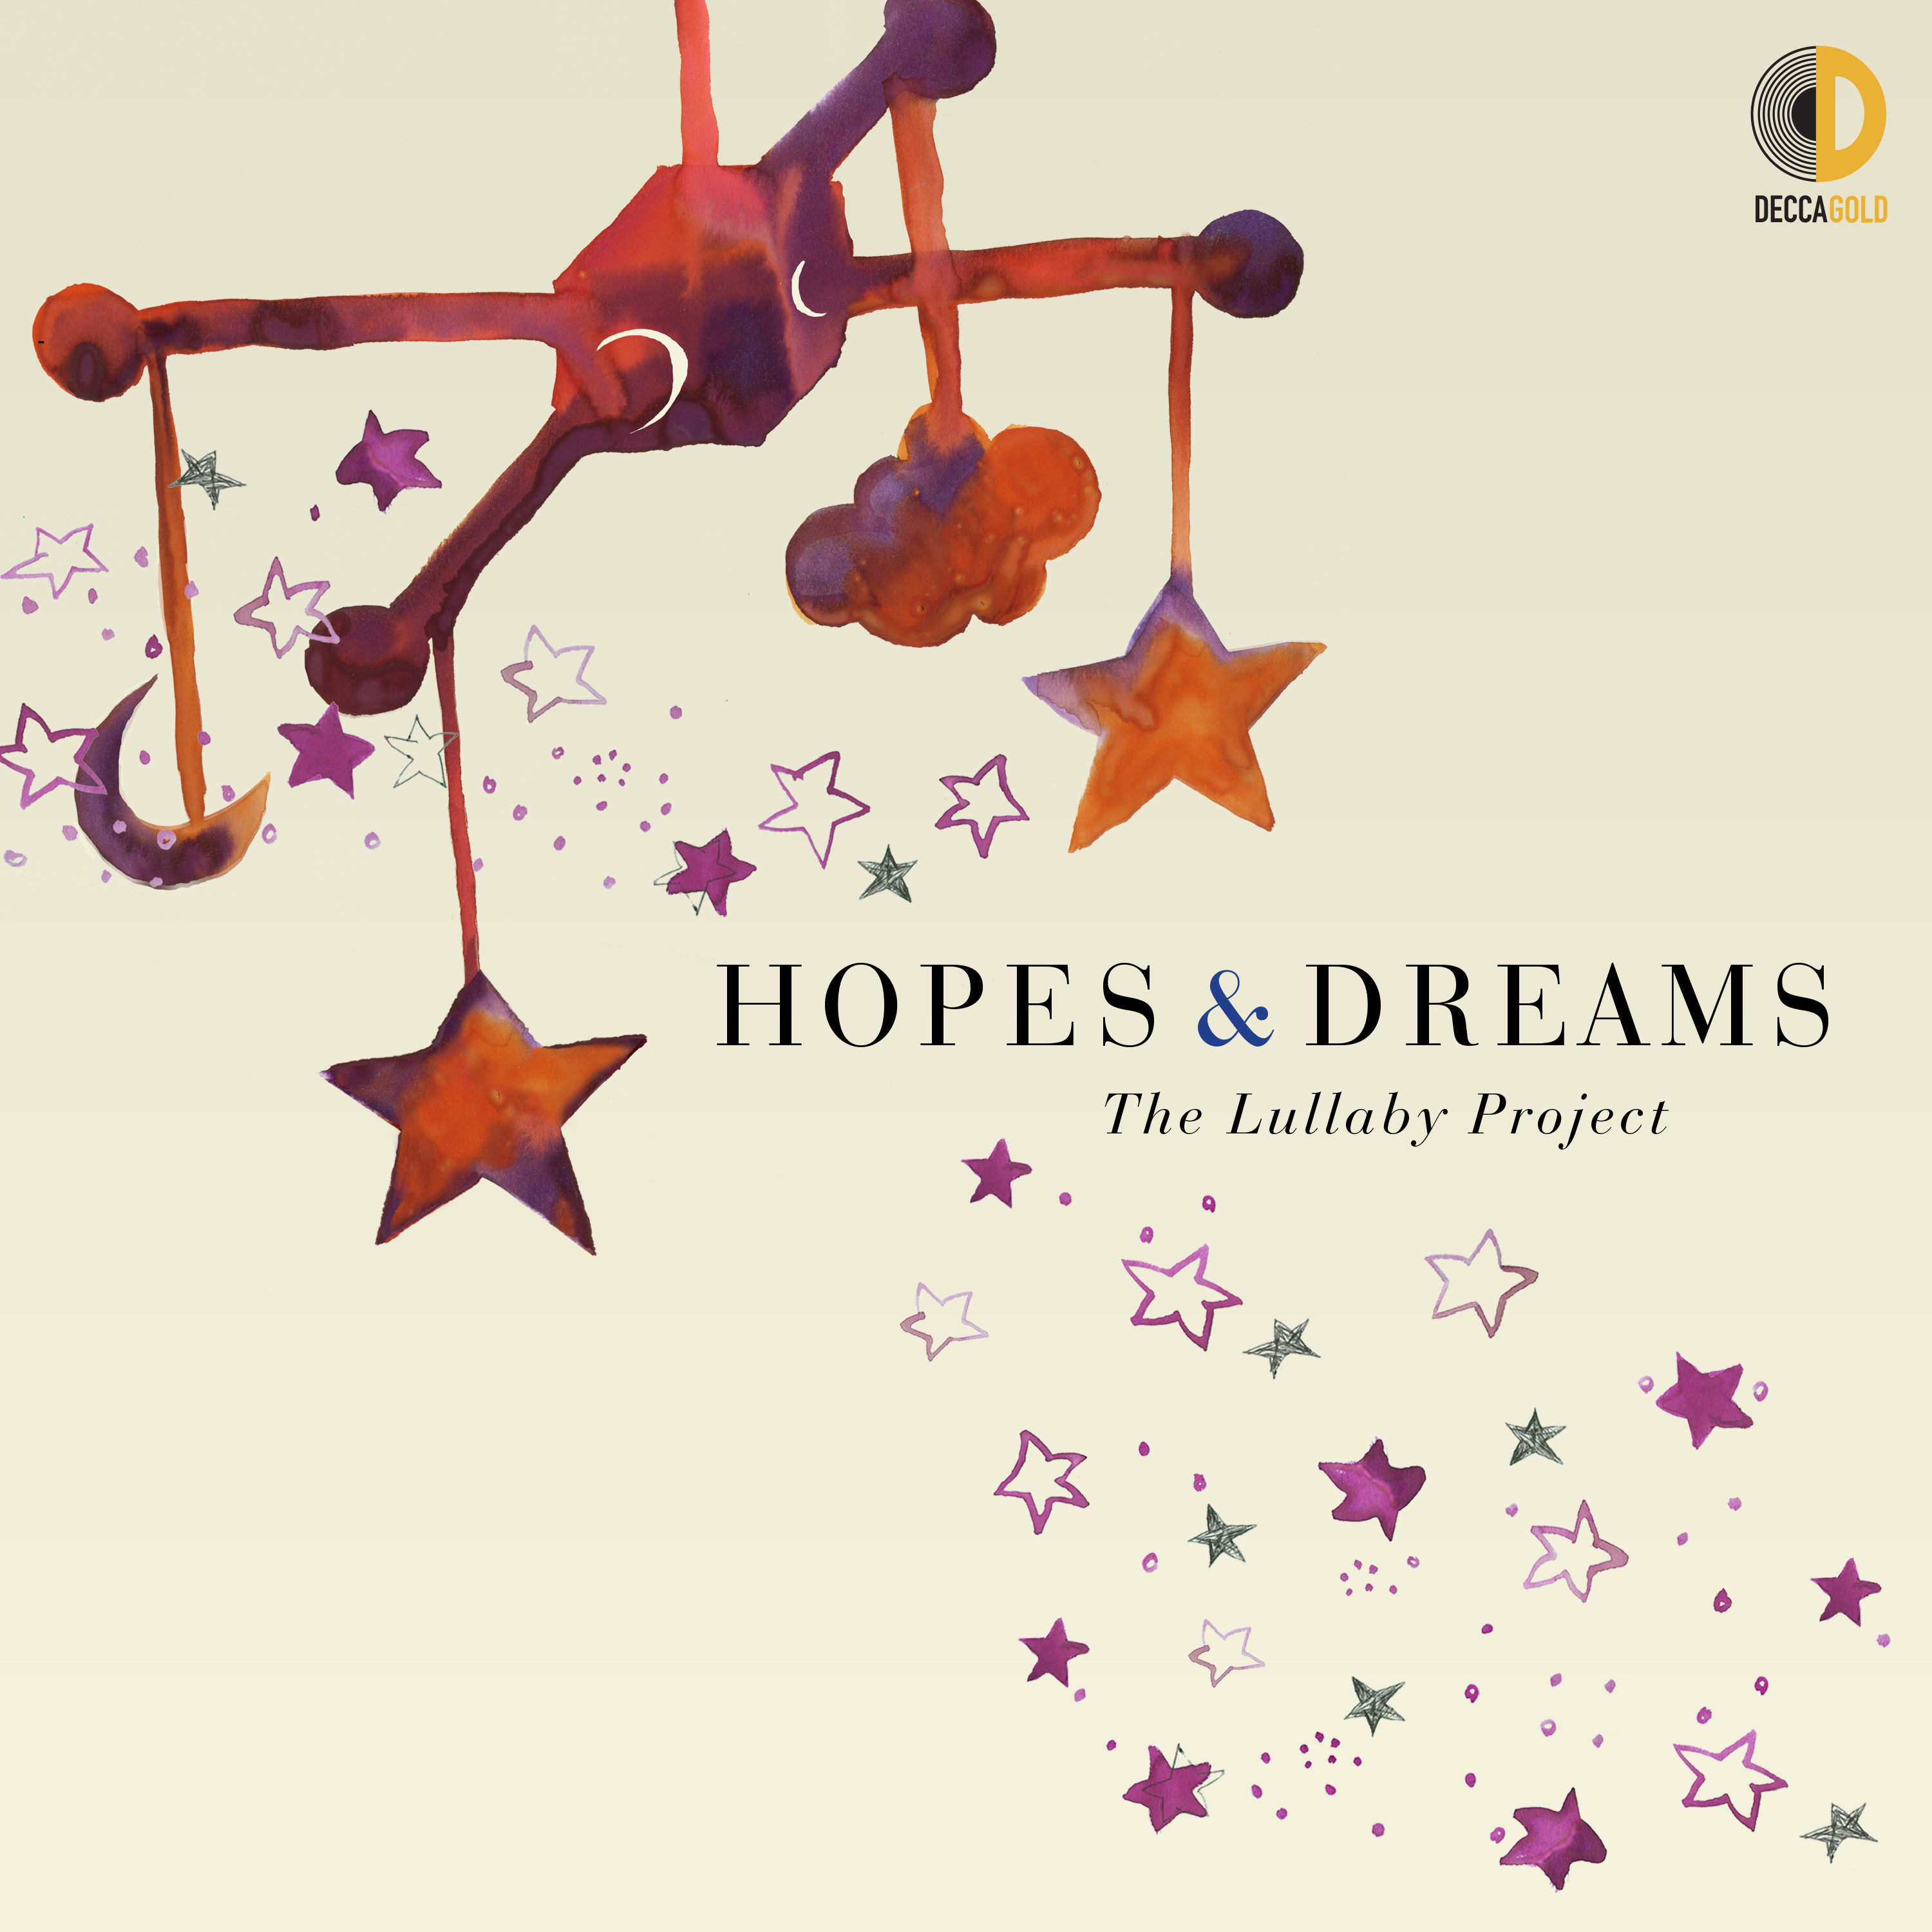 Hopes & Dreams The Lullaby Project